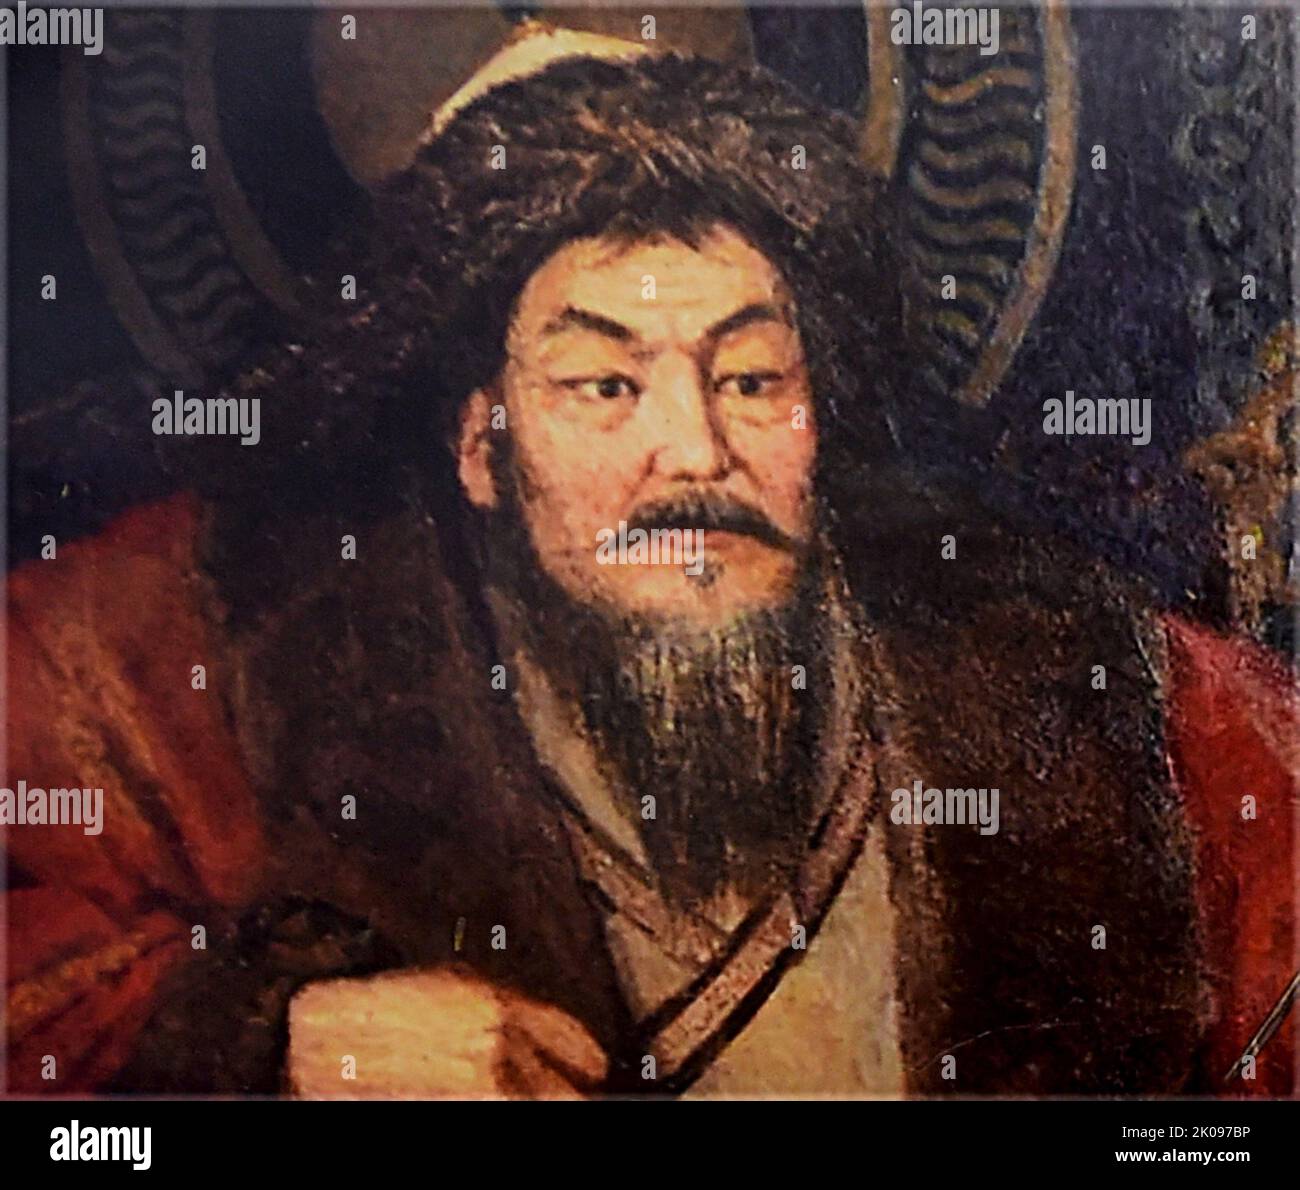 Genghis Khan (c.1158 - August 18, 1227), born Temujin, was the founder and first Great Khan (Emperor) of the Mongol Empire, which became the largest contiguous empire in history after his death. He came to power by uniting many of the nomadic tribes of Northeast Asia. After founding the Empire and being proclaimed the universal ruler of the Mongols, or Genghis Khan, he launched the Mongol invasions, which ultimately conquered most of Eurasia, reaching as far west as Poland and as far south as Egypt. Stock Photo